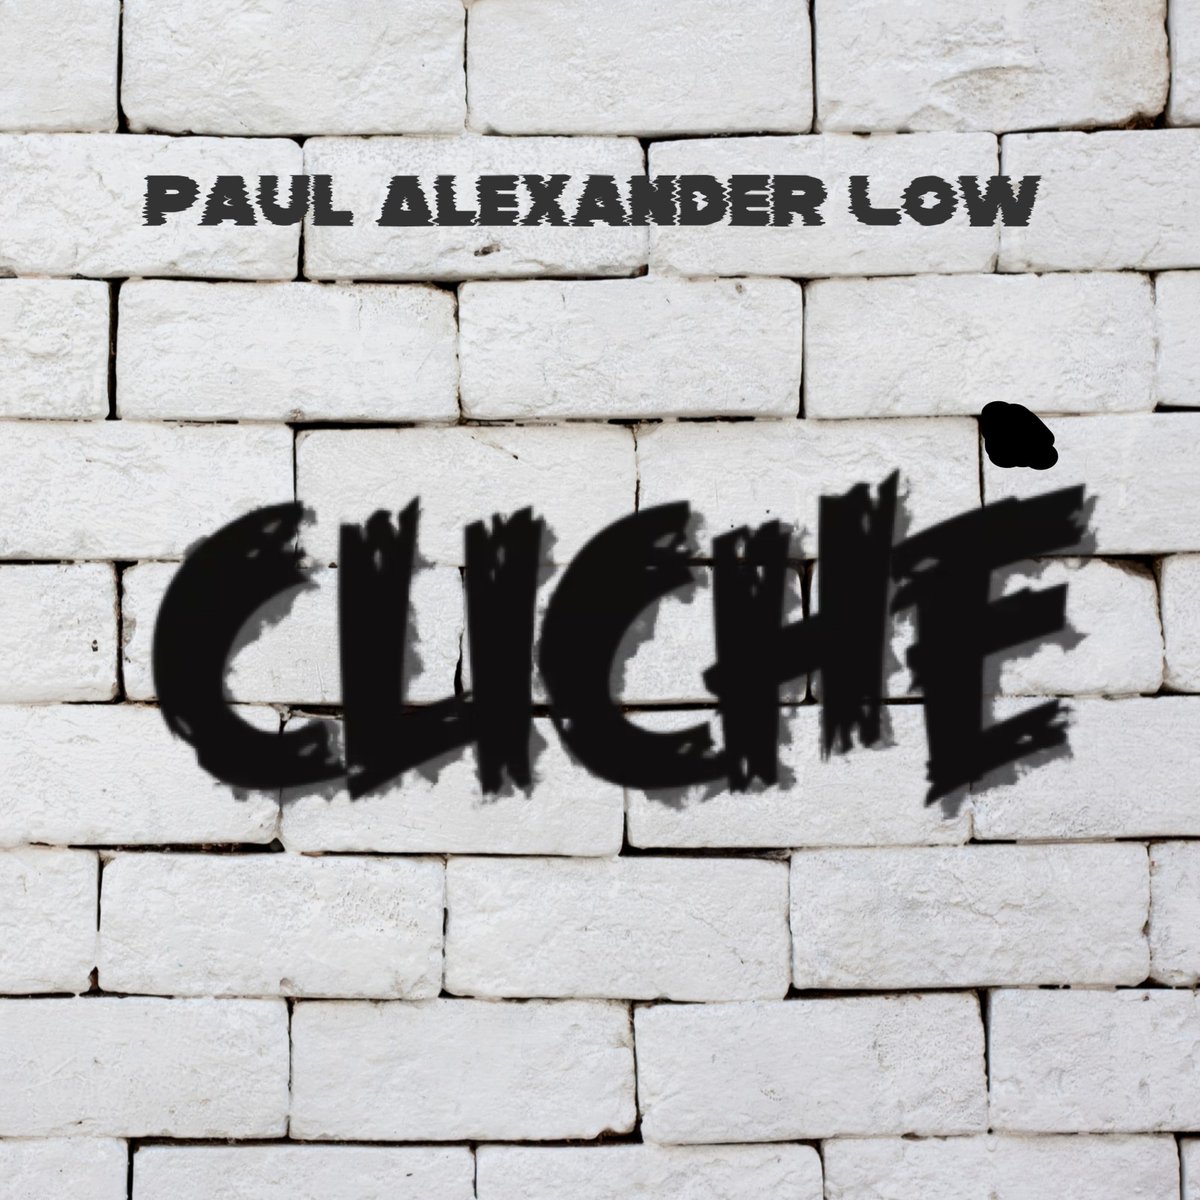 🔥New beats alert!🔥 #PaulAlexanderLow is dropping his latest single 'Cliche' on Aug 7th! 🎶 Get ready to vibe with the freshest sound of the summer! 🌞 #NewMusic #Cliche #SummerVibes